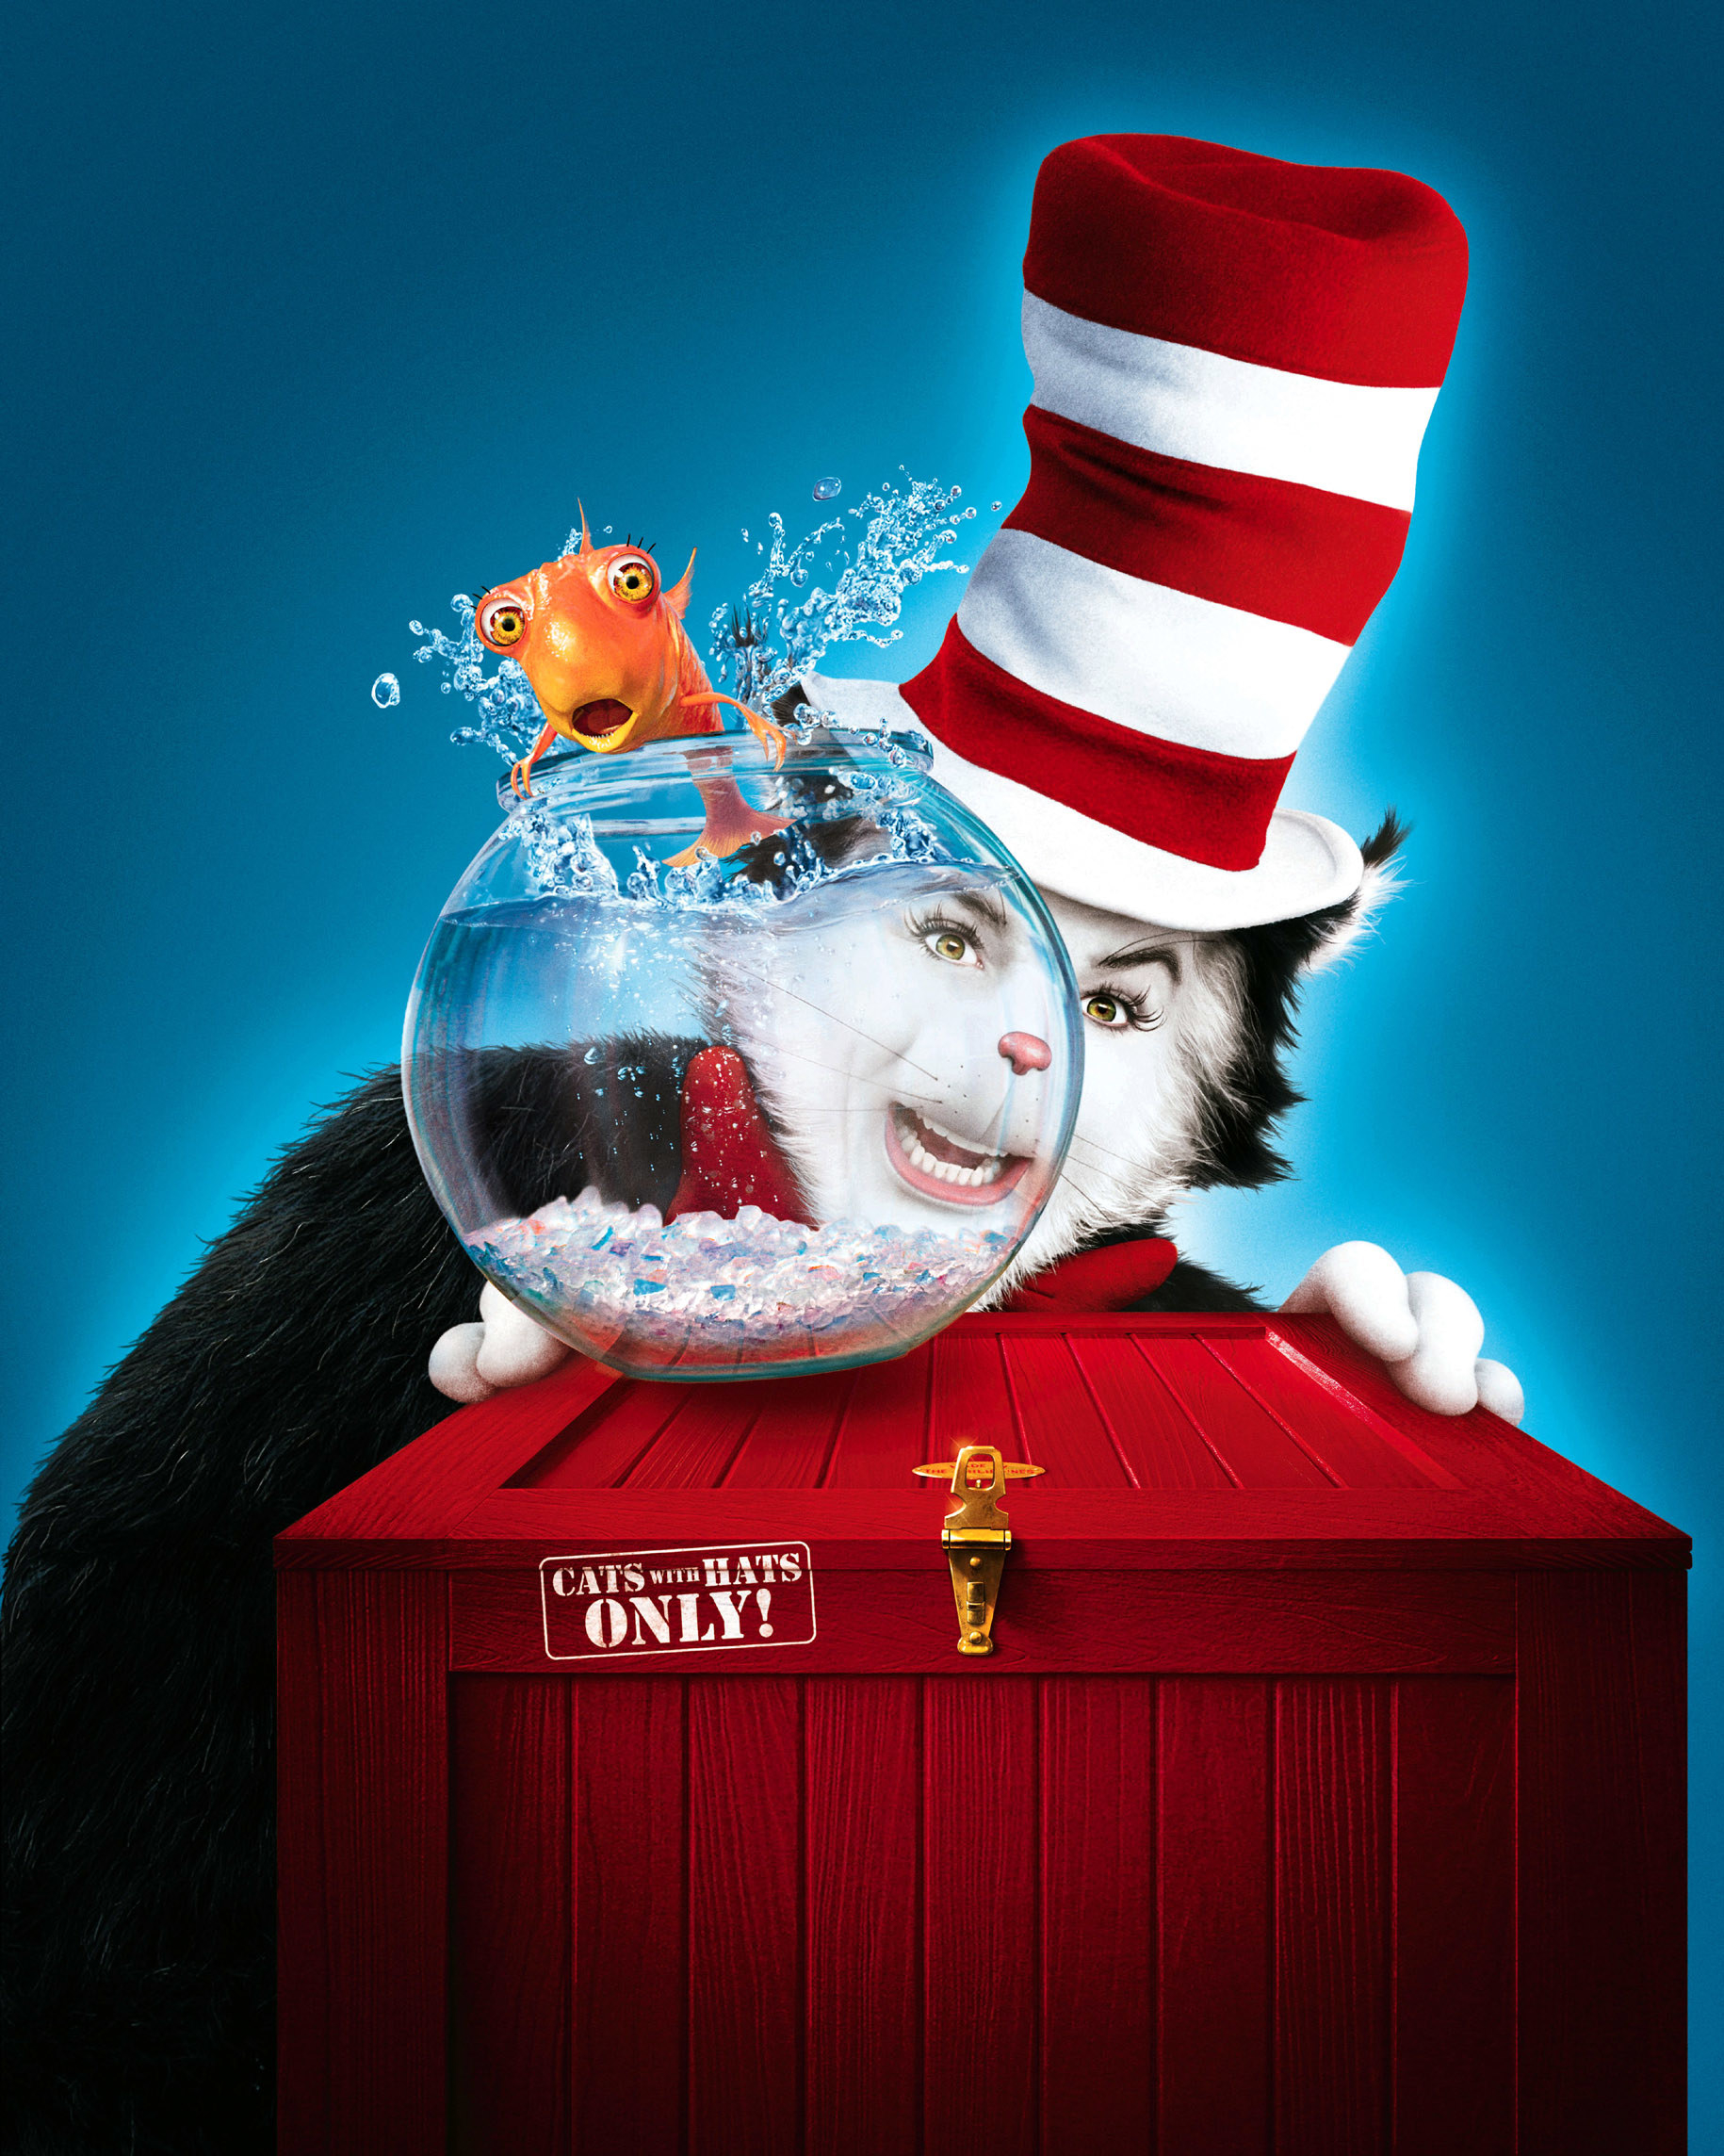 The fish coming out of the bowl with a shocked expression as the Cat in the Hat looks on